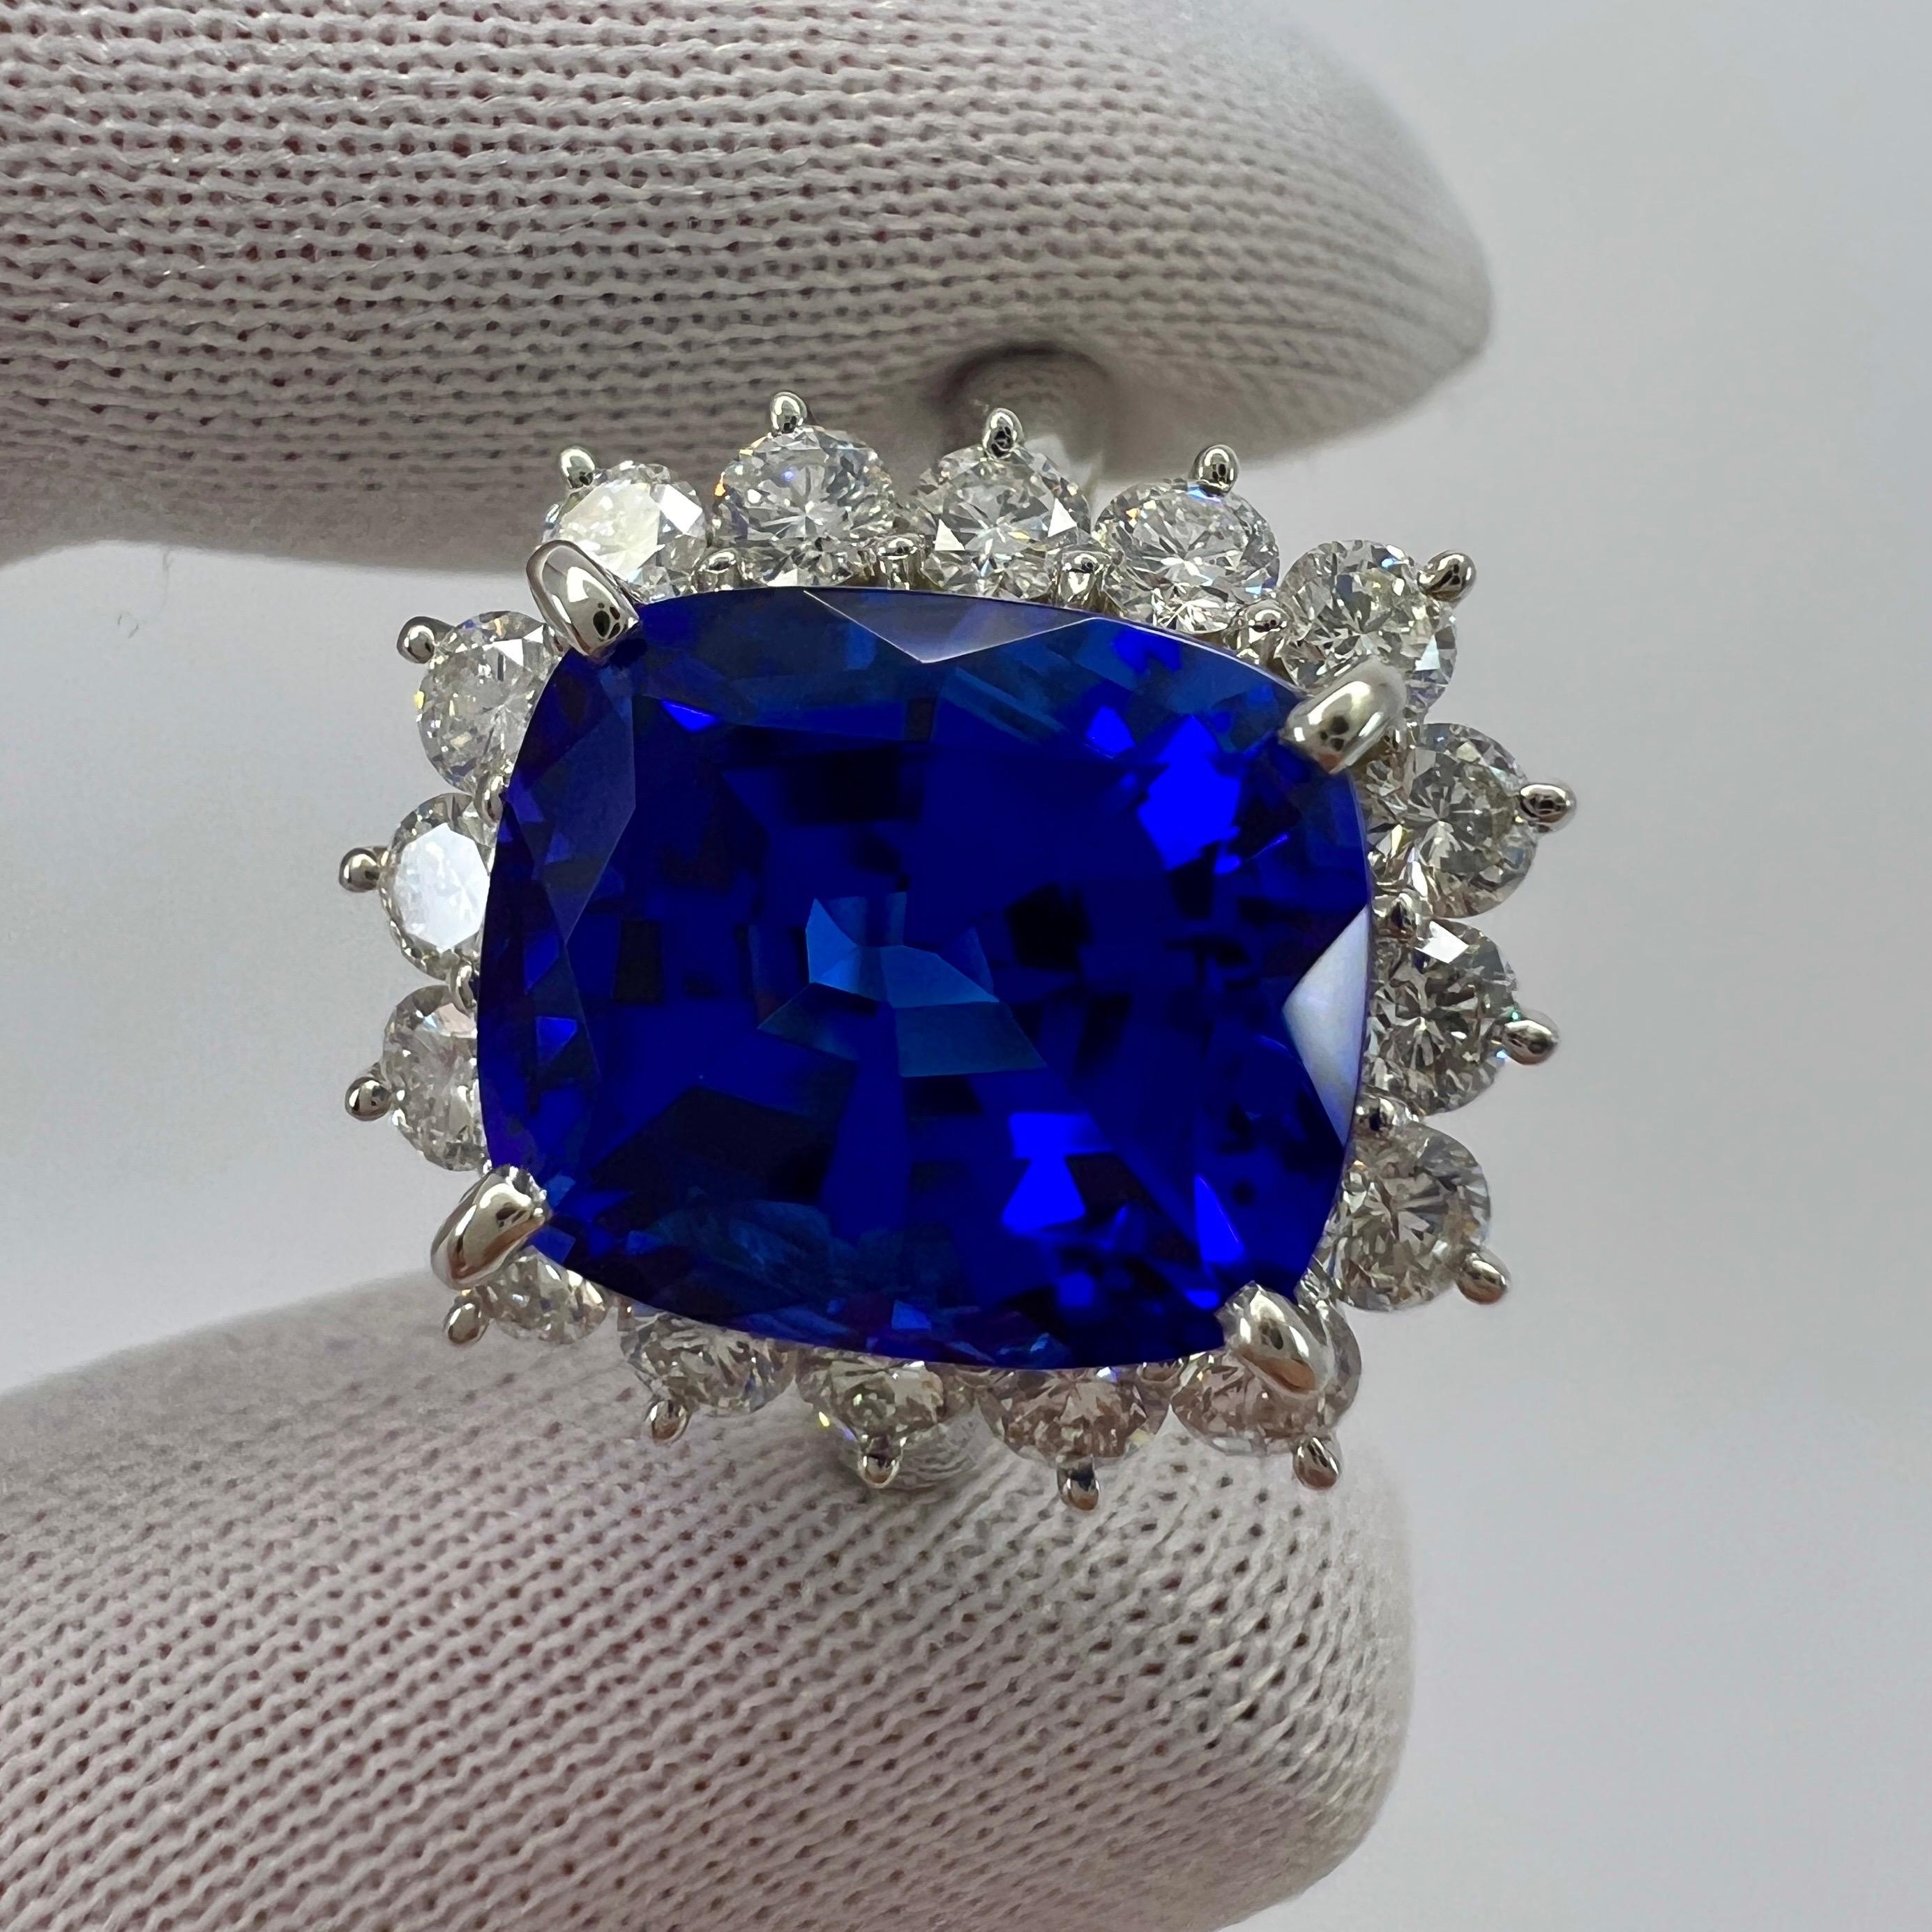 Fine Natural Vivid Blue Violet Tanzanite Cushion Cut Platinum Cocktail Ring.

7.04 Total carat. The fine tanzanite centre stone weighs 5.99 carat and has an absolutely stunning top grade vivid violetish blue colour and excellent clarity. Practically